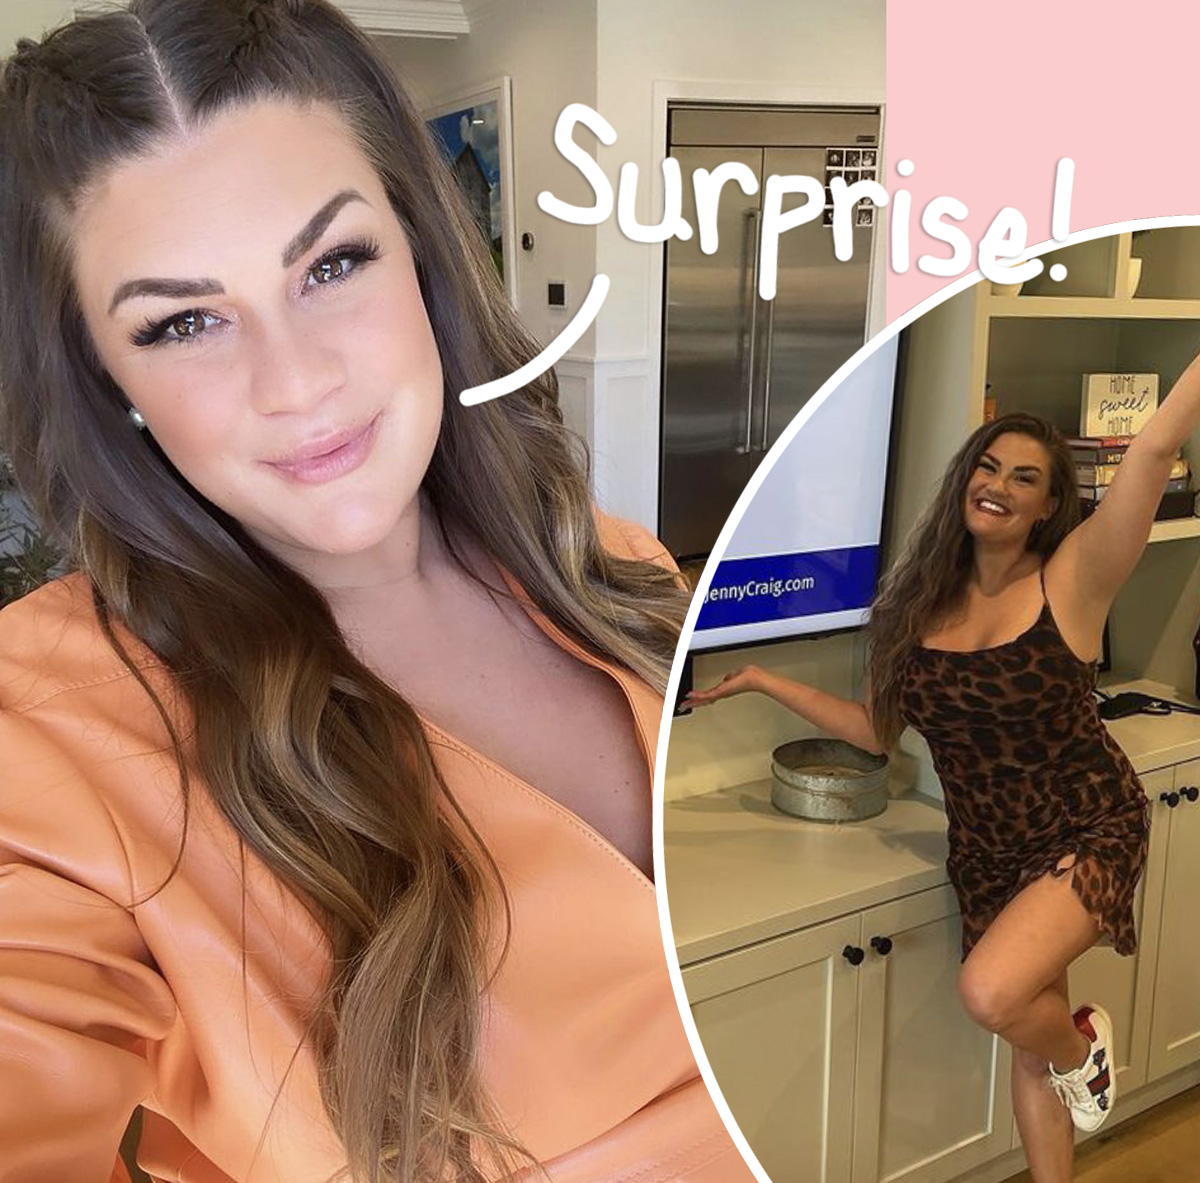 #Vanderpump Rules Vet Brittany Cartwright Shows Off Big-Time Weight Loss!